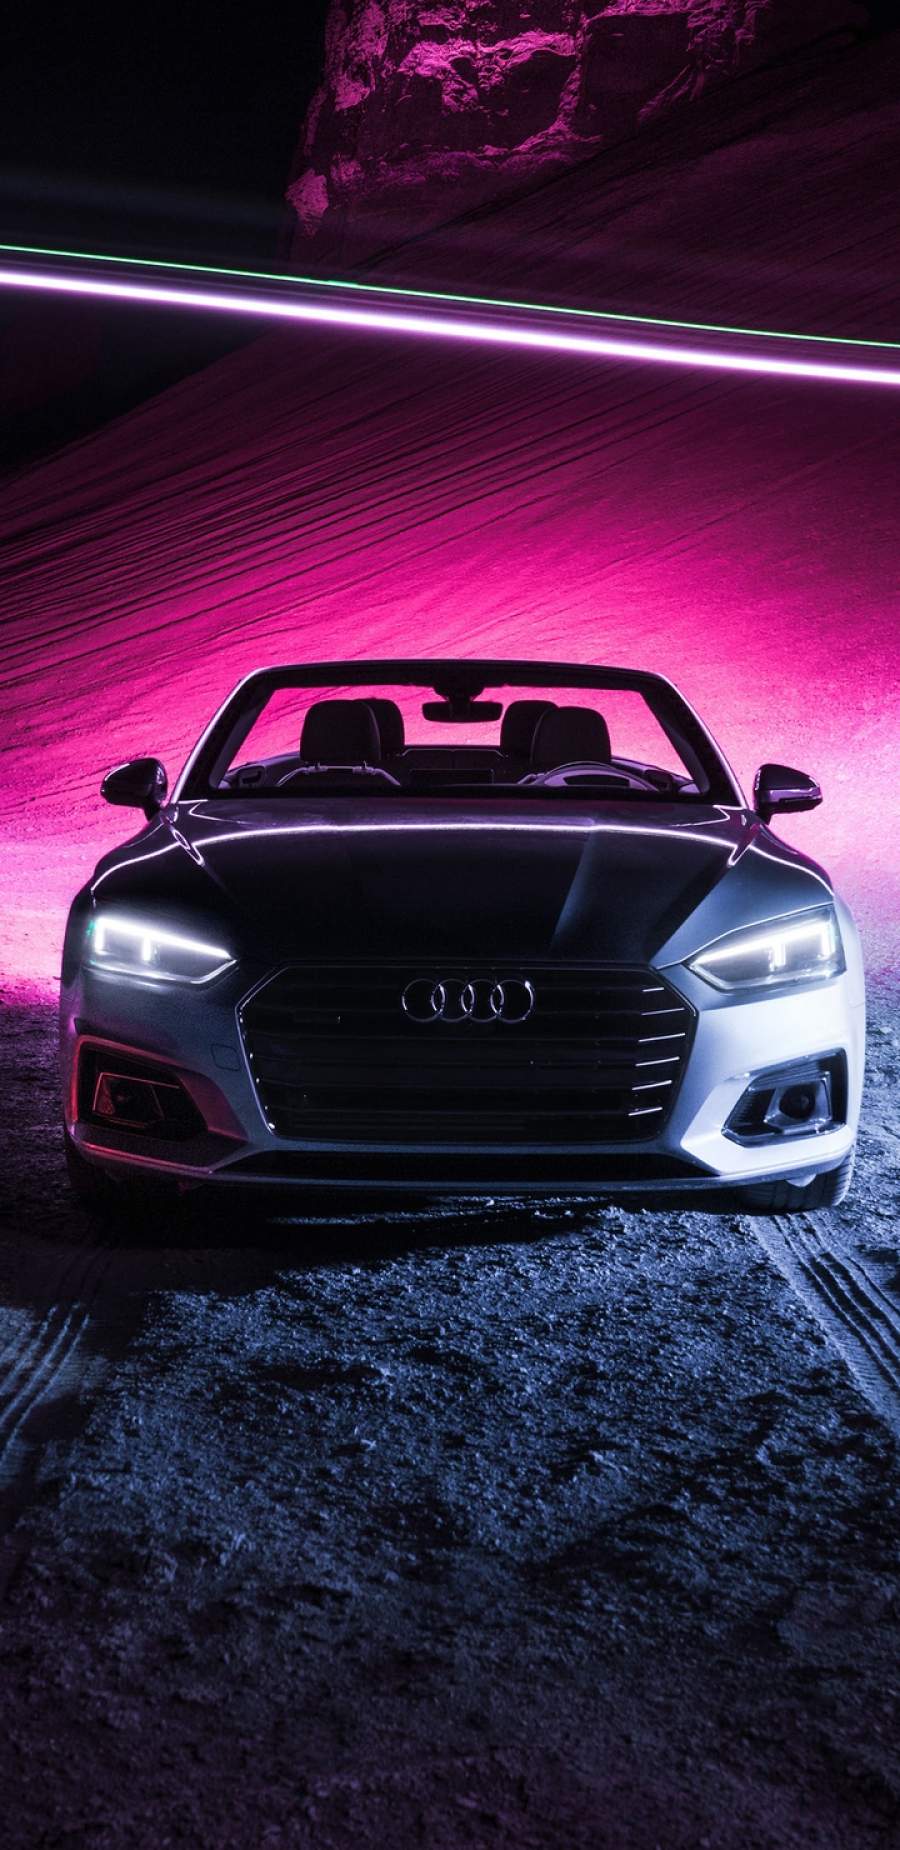 Audi A5 Iphone Wallpaper Iphone Wallpapers Iphone Wallpapers